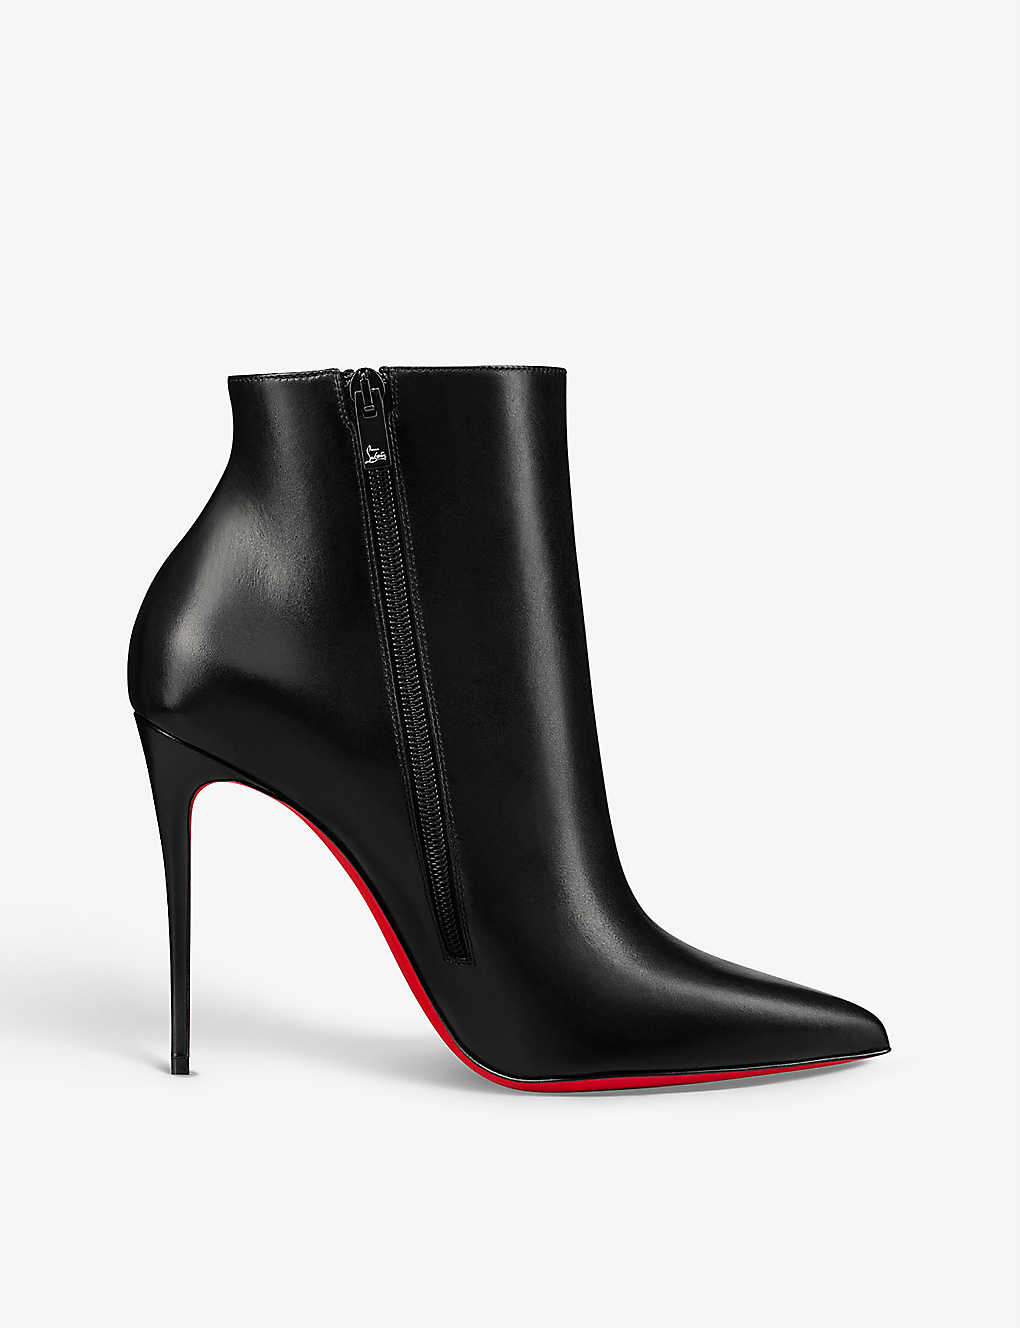 Christian Louboutin Womens Black So Kate Booty 100 Leather Heeled Boots